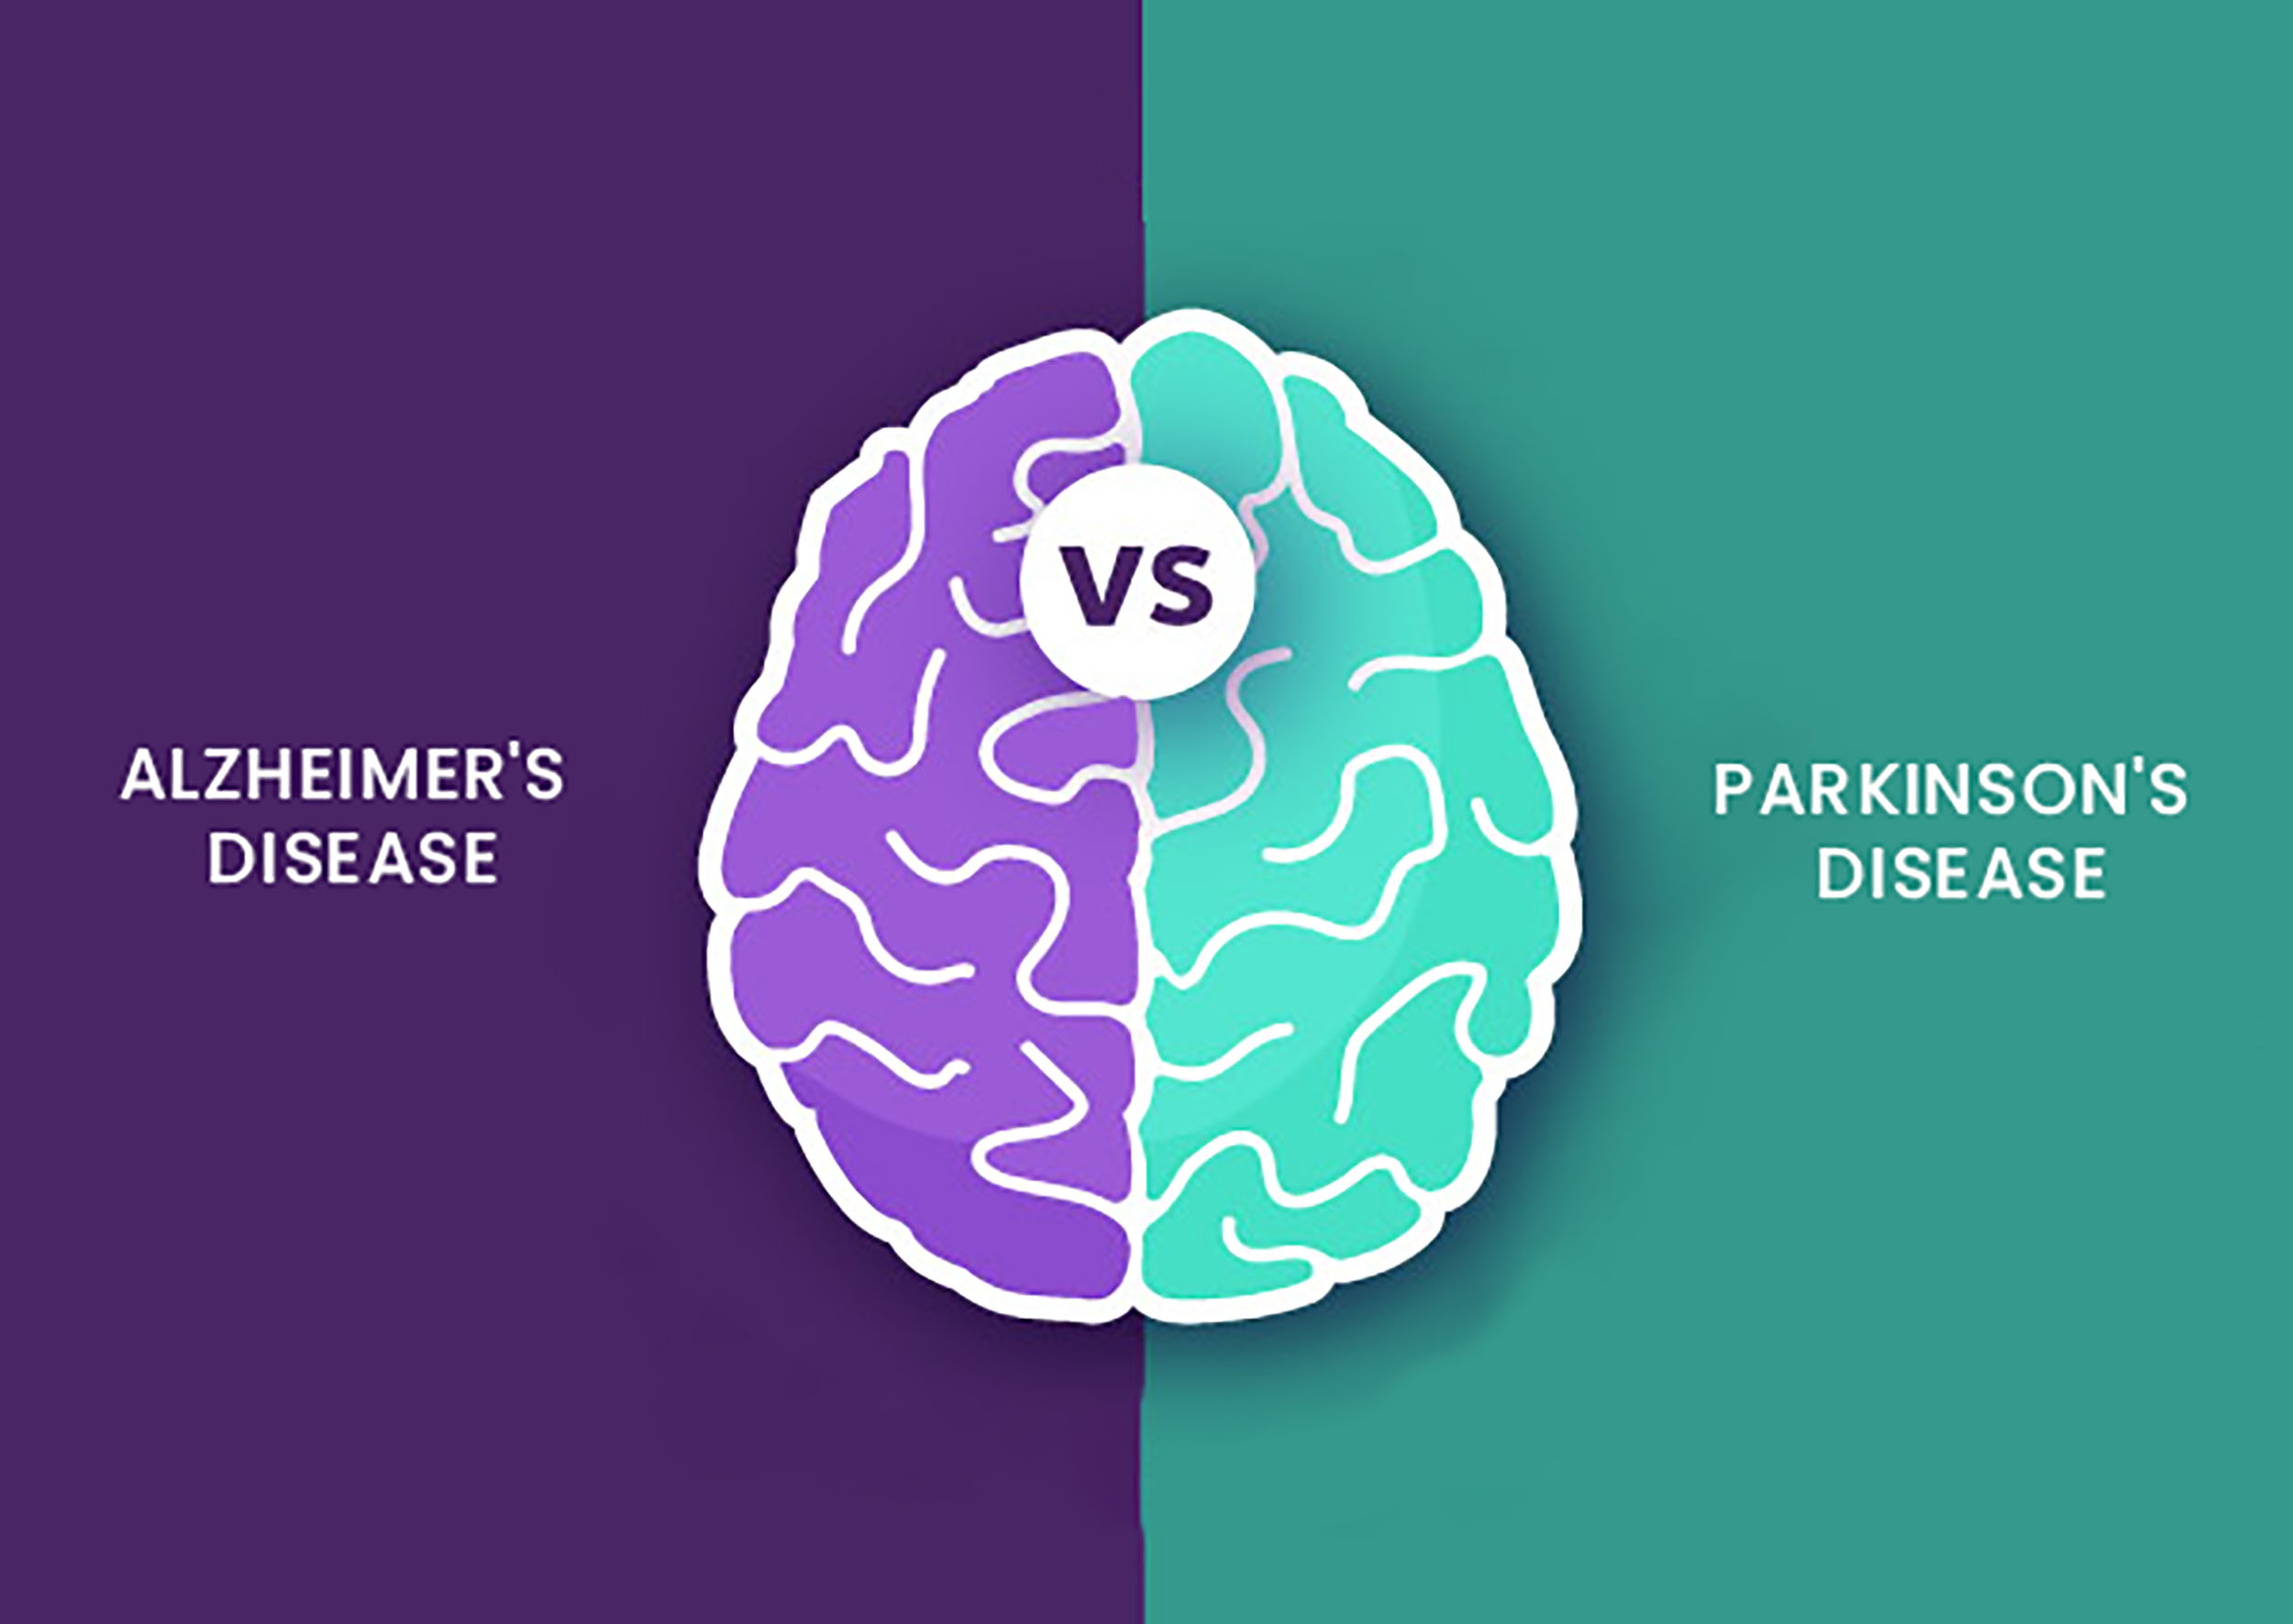 Understanding the Differences between Alzheimer's and Parkinson's Disease